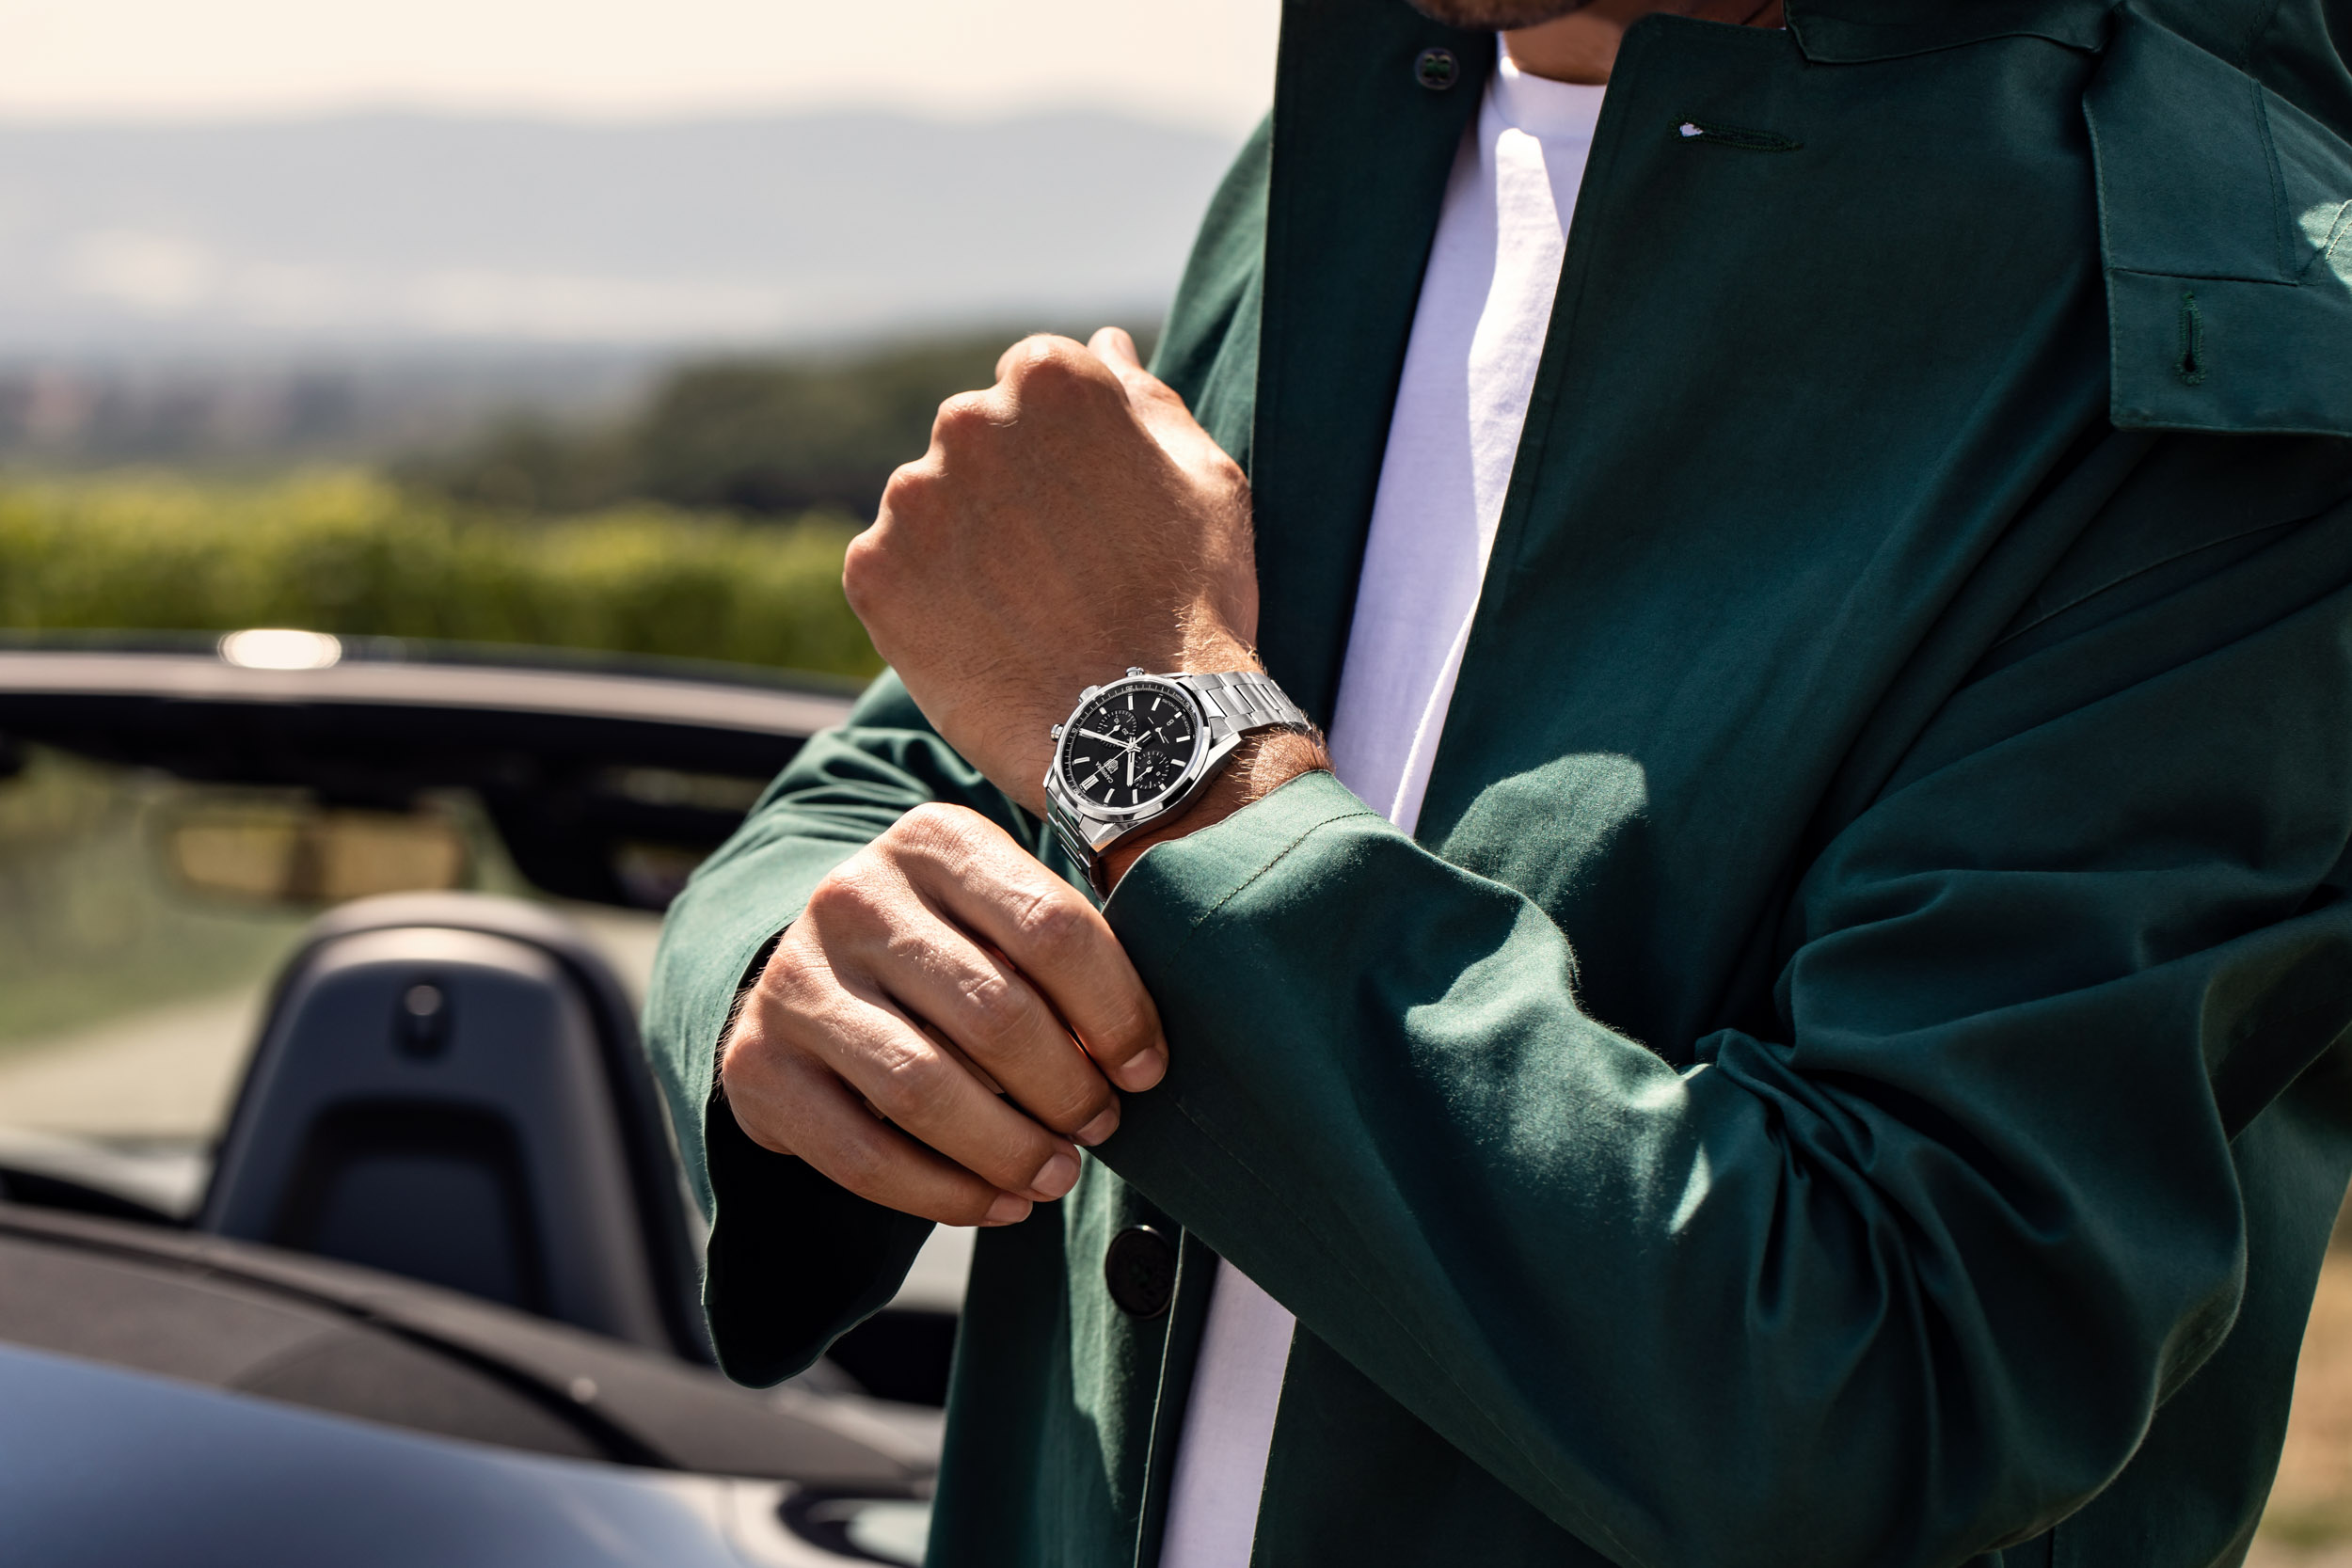 2020 TAG Heuer Carrera Chronograph - The Hour Glass Official